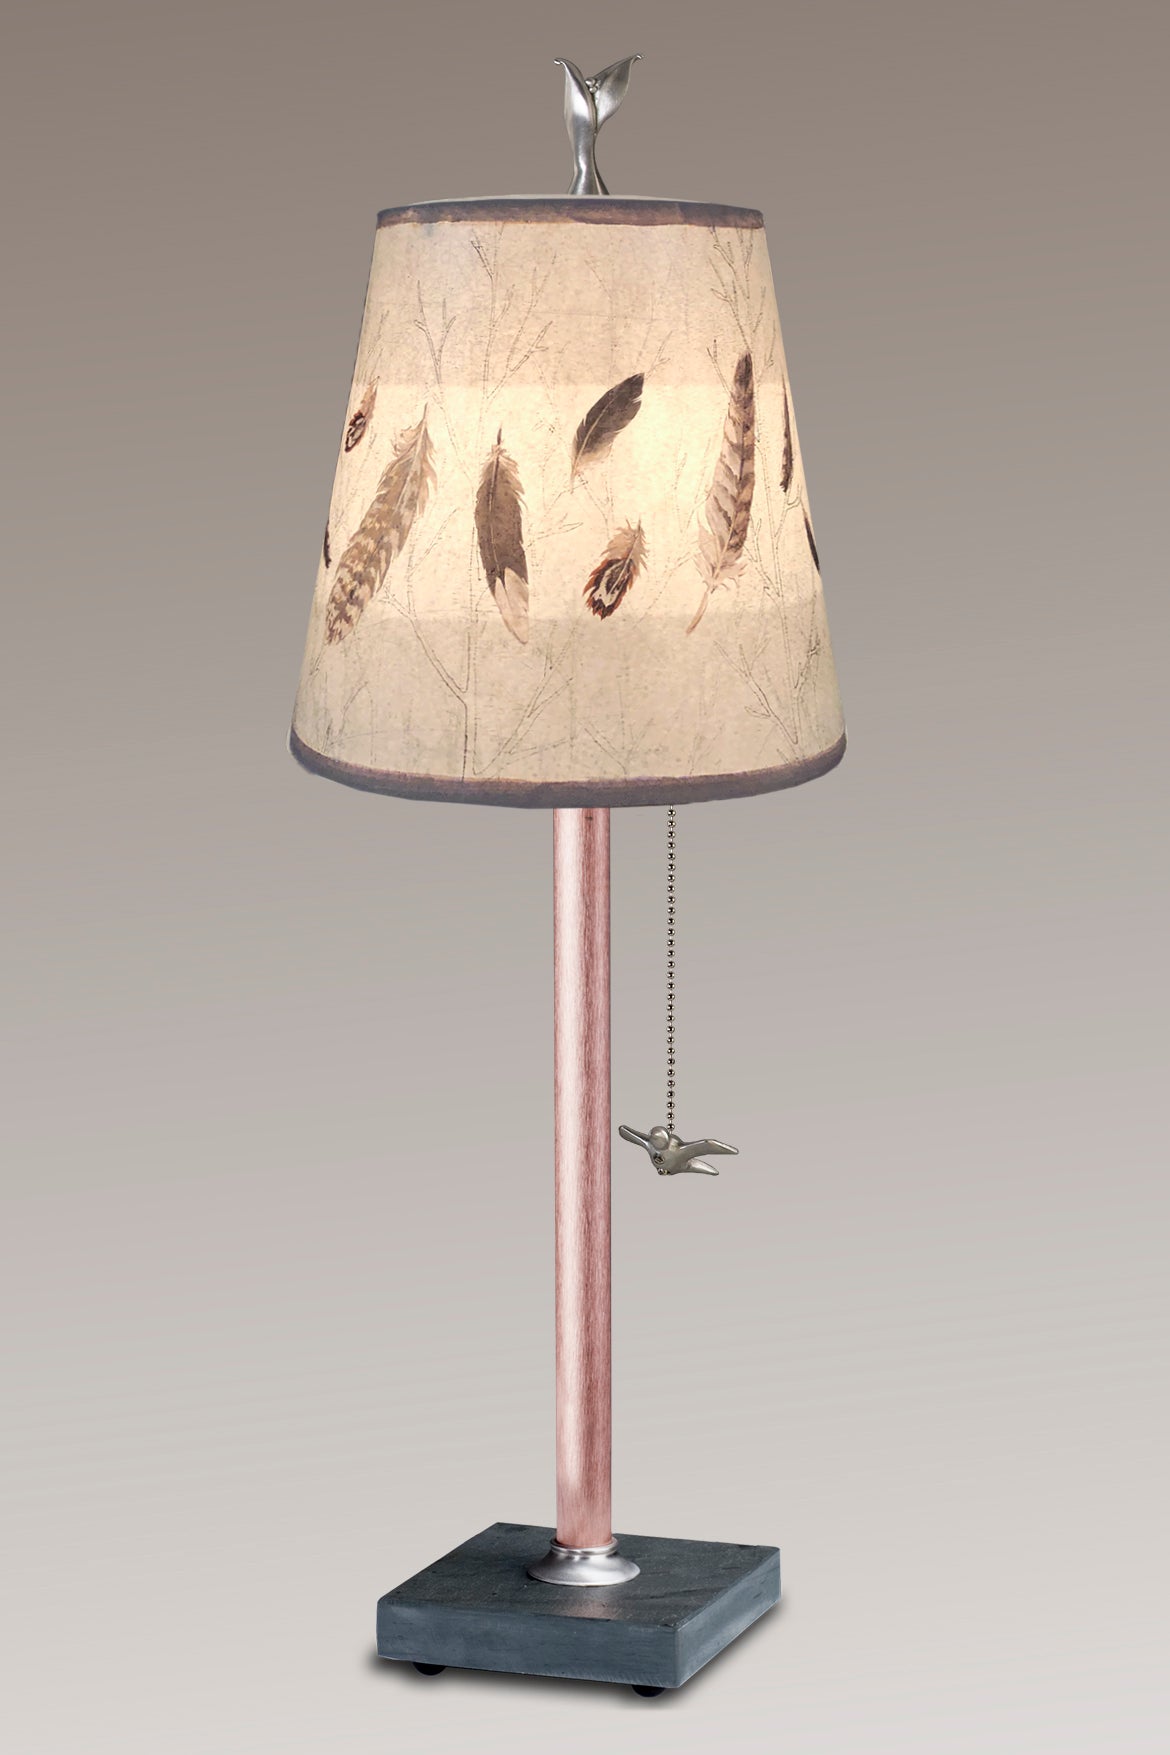 Janna Ugone &amp; Co Table Lamps Copper Table Lamp with Small Drum in Feathers in Pebble